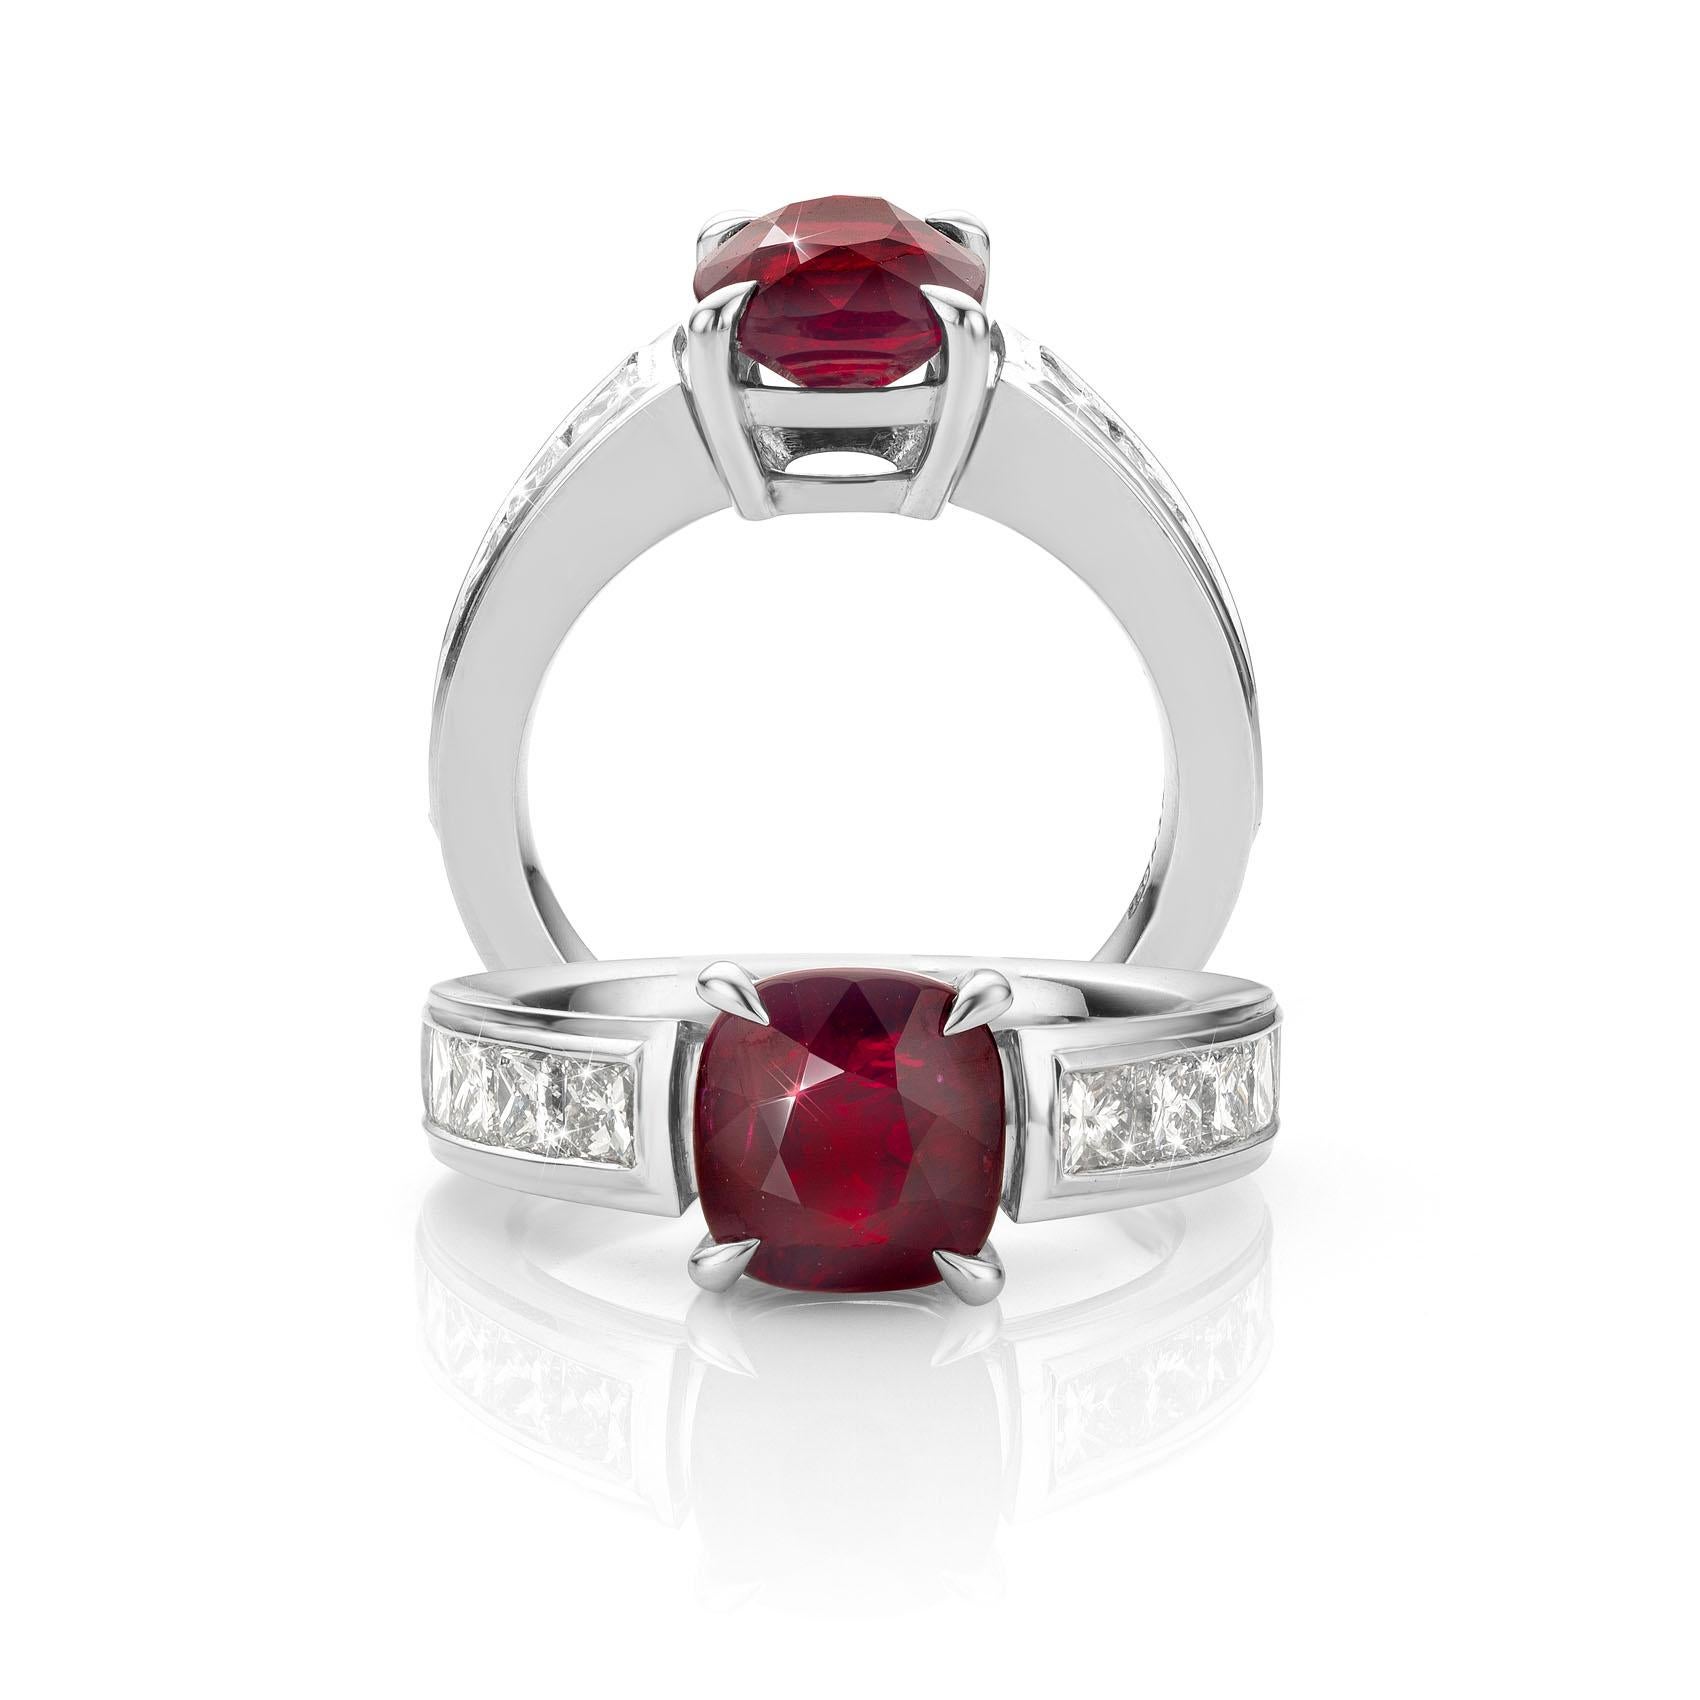 For Sale:  Cober Jewellery with 3.03 Carat Ruby  1.60 Carat total Diamonds White Gold Ring  5